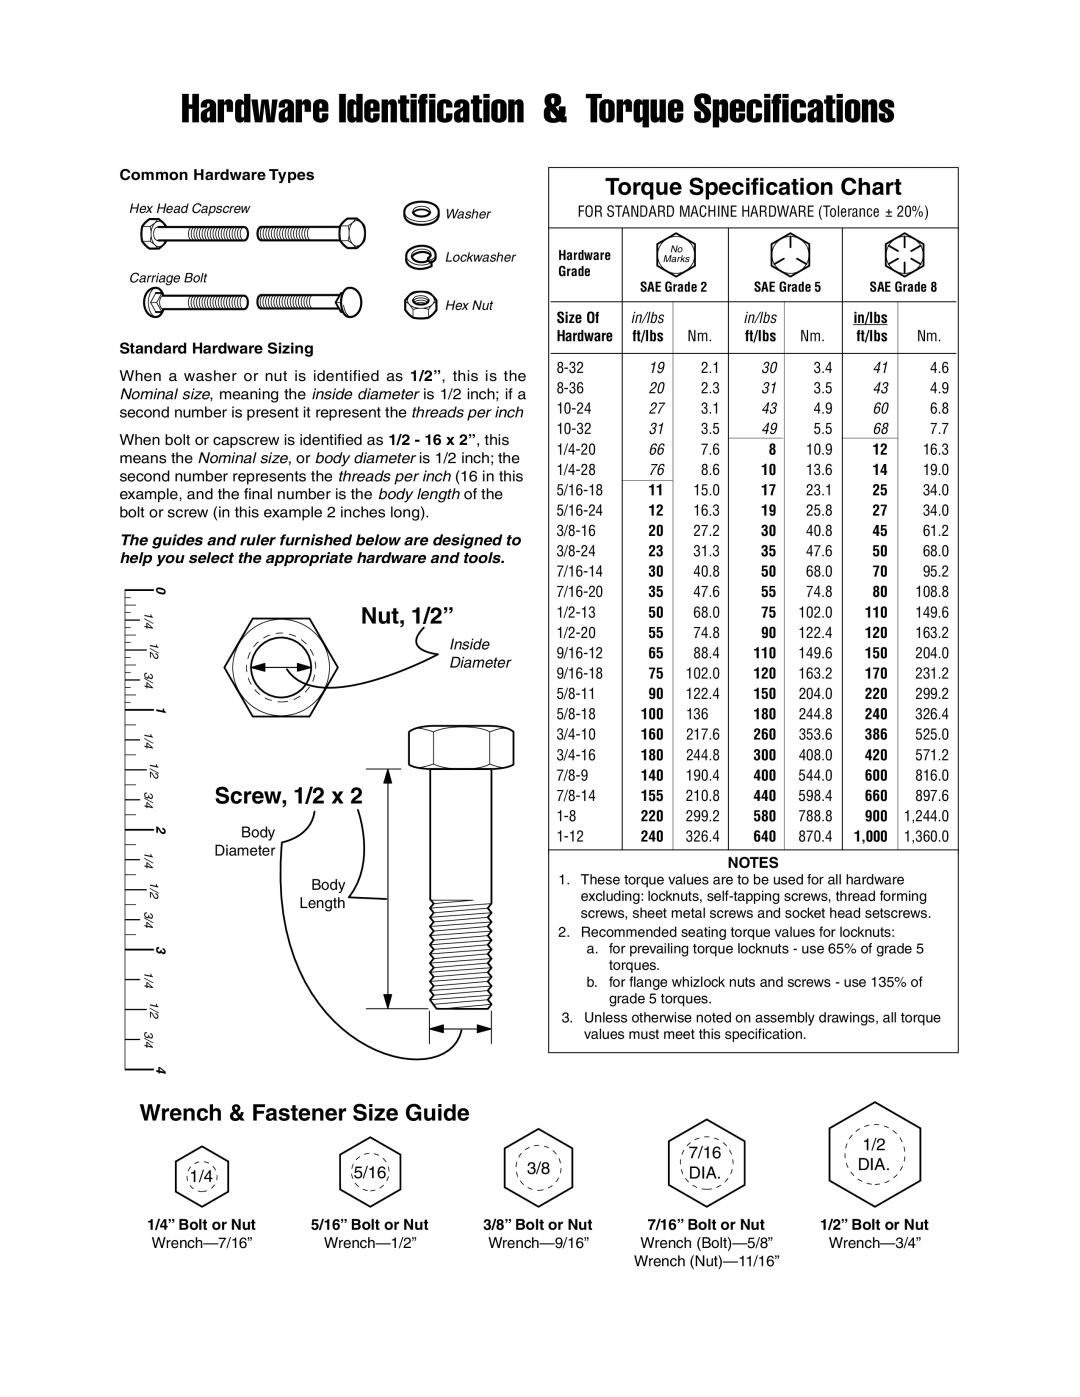 Simplicity 1695195 Wrench & Fastener Size Guide, Hardware Identification & Torque Specifications, Nut, 1/2”, Screw, 1/2 